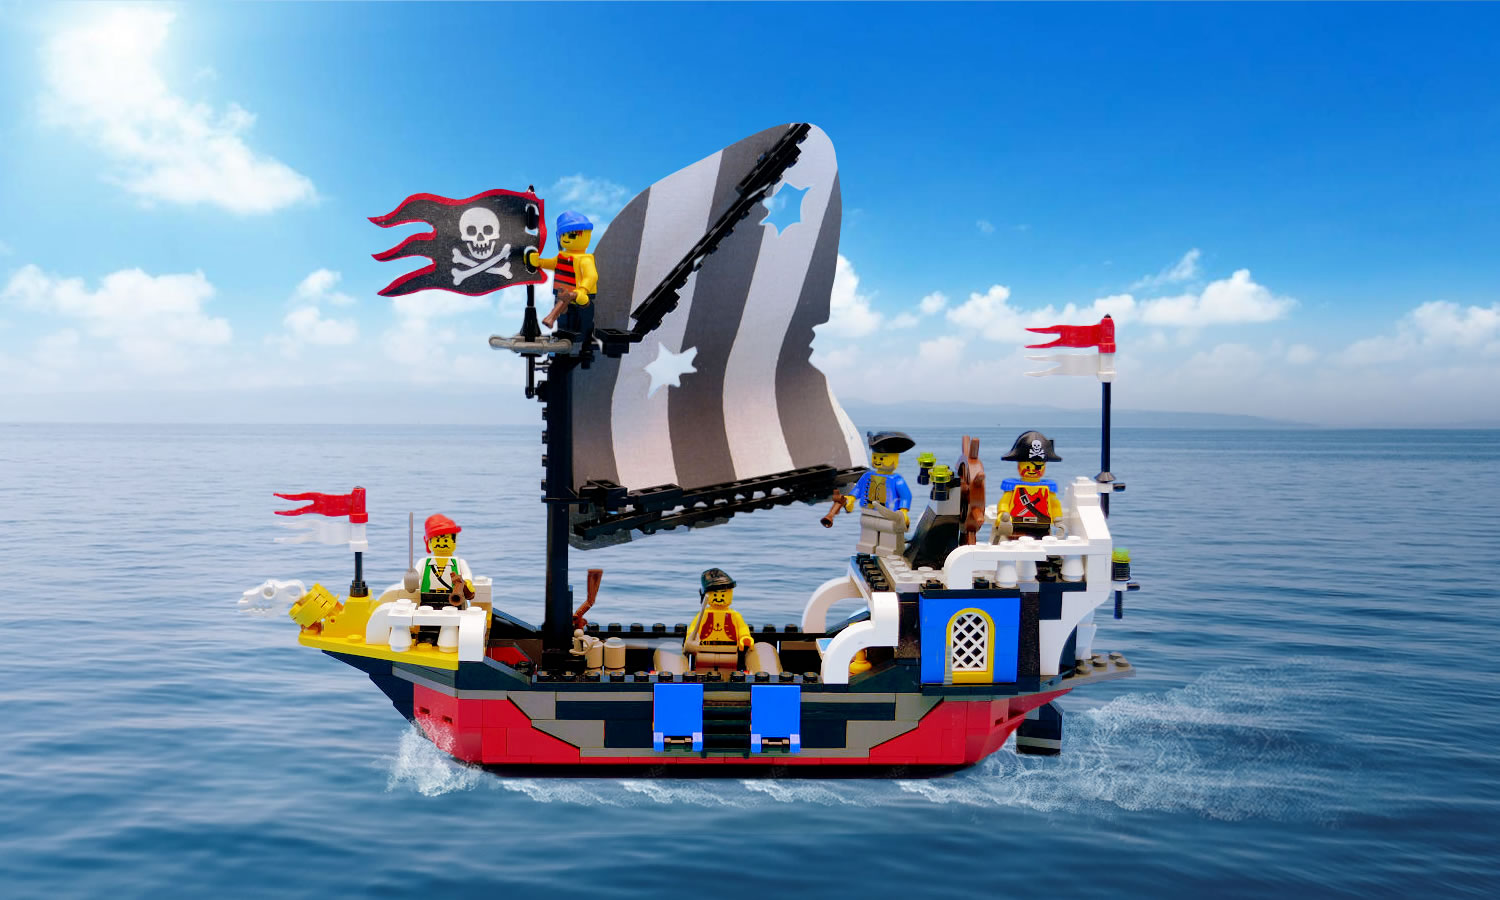 Featured Image for “Captain Ironhook’s Classic Pirate Junk” by Legostein